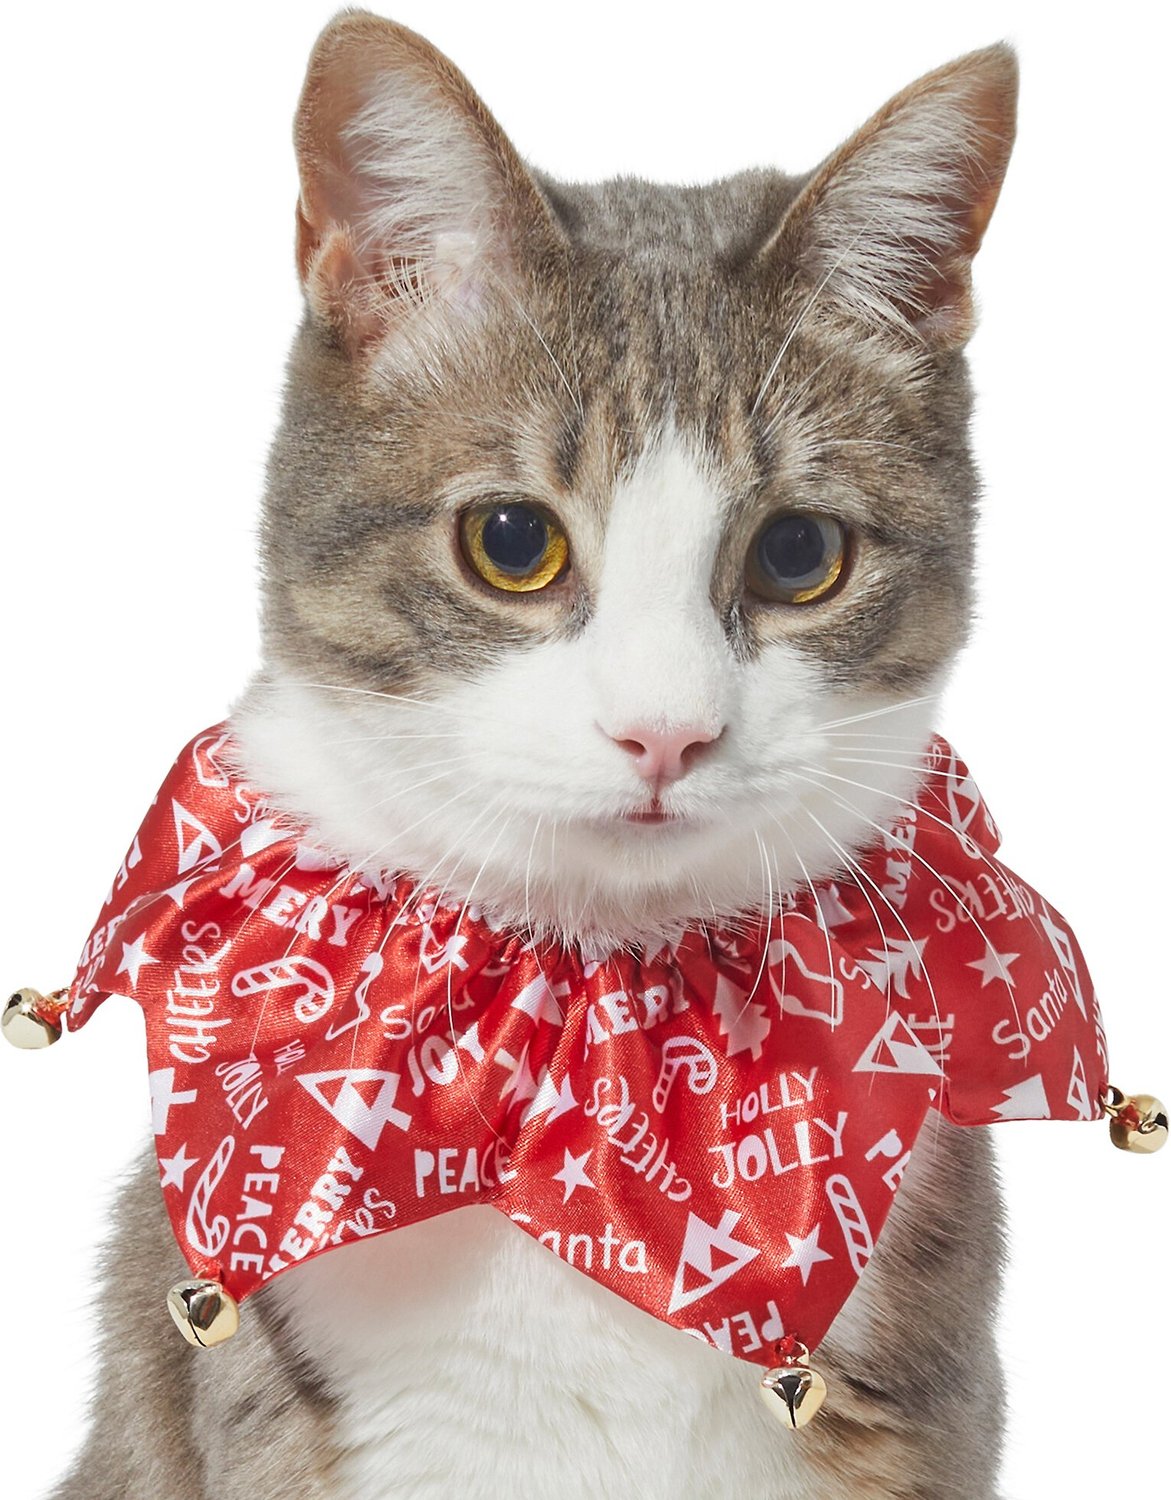 Frisco Merry Print Cat Ruffle Collar with Bells, One Size By Frisco
